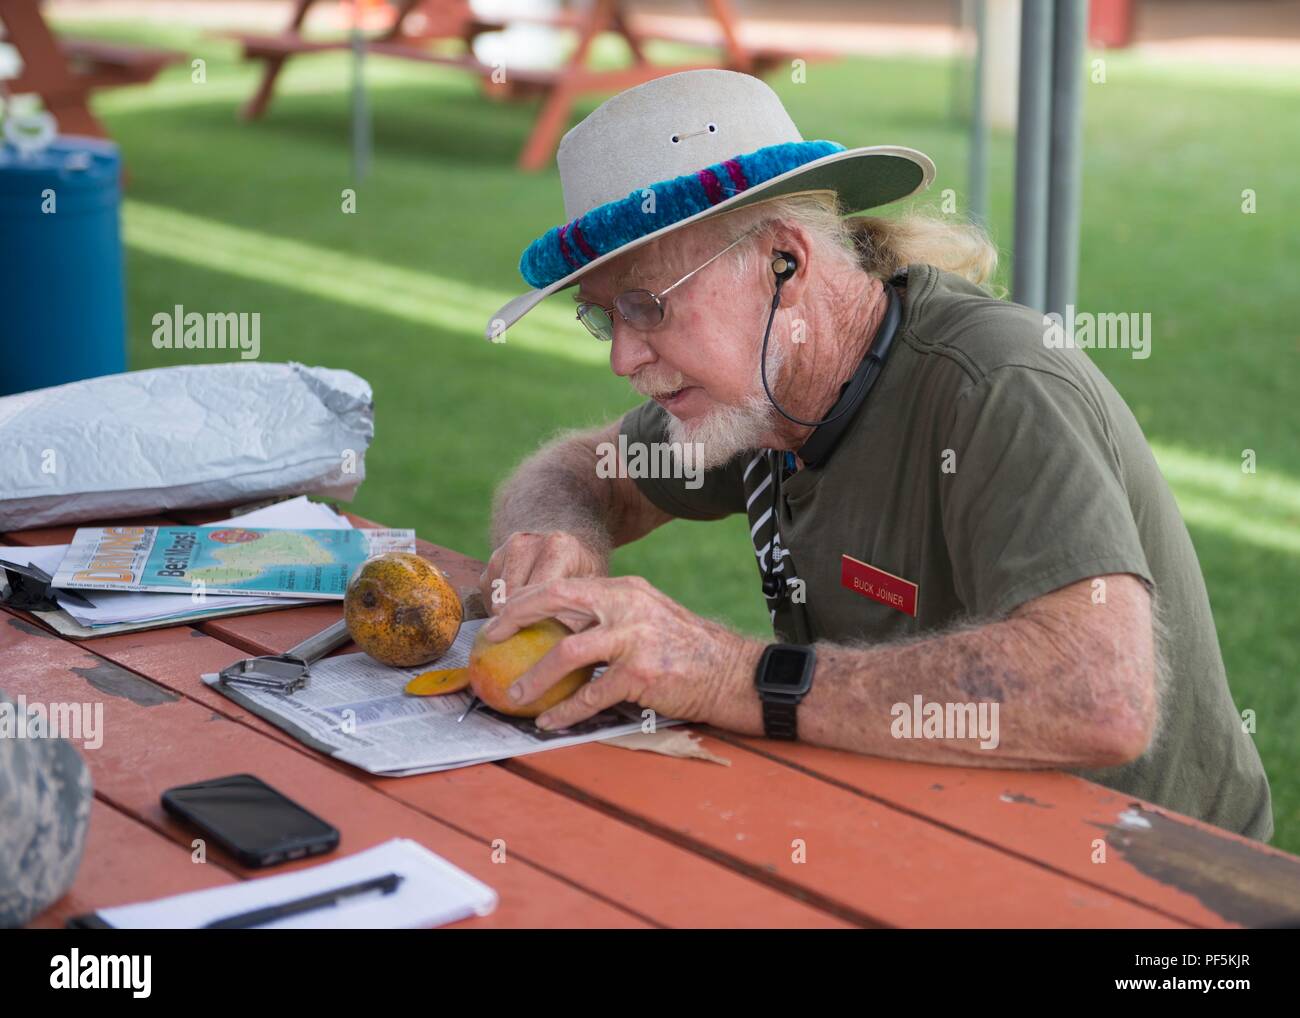 https://c8.alamy.com/comp/PF5KJR/local-volunteer-and-community-leader-buck-joiner-opens-a-mango-to-share-at-the-kihei-clinic-during-tropic-care-maui-county-2018-in-kihei-hawaii-aug-14-2018-tropic-care-maui-county-2018-is-a-joint-service-hands-on-readiness-training-mission-offering-no-cost-medical-dental-and-vision-services-to-people-at-six-locations-across-maui-molokai-and-lanai-from-august-11-19-us-air-national-guard-photo-by-tech-sgt-seth-bleuer-PF5KJR.jpg